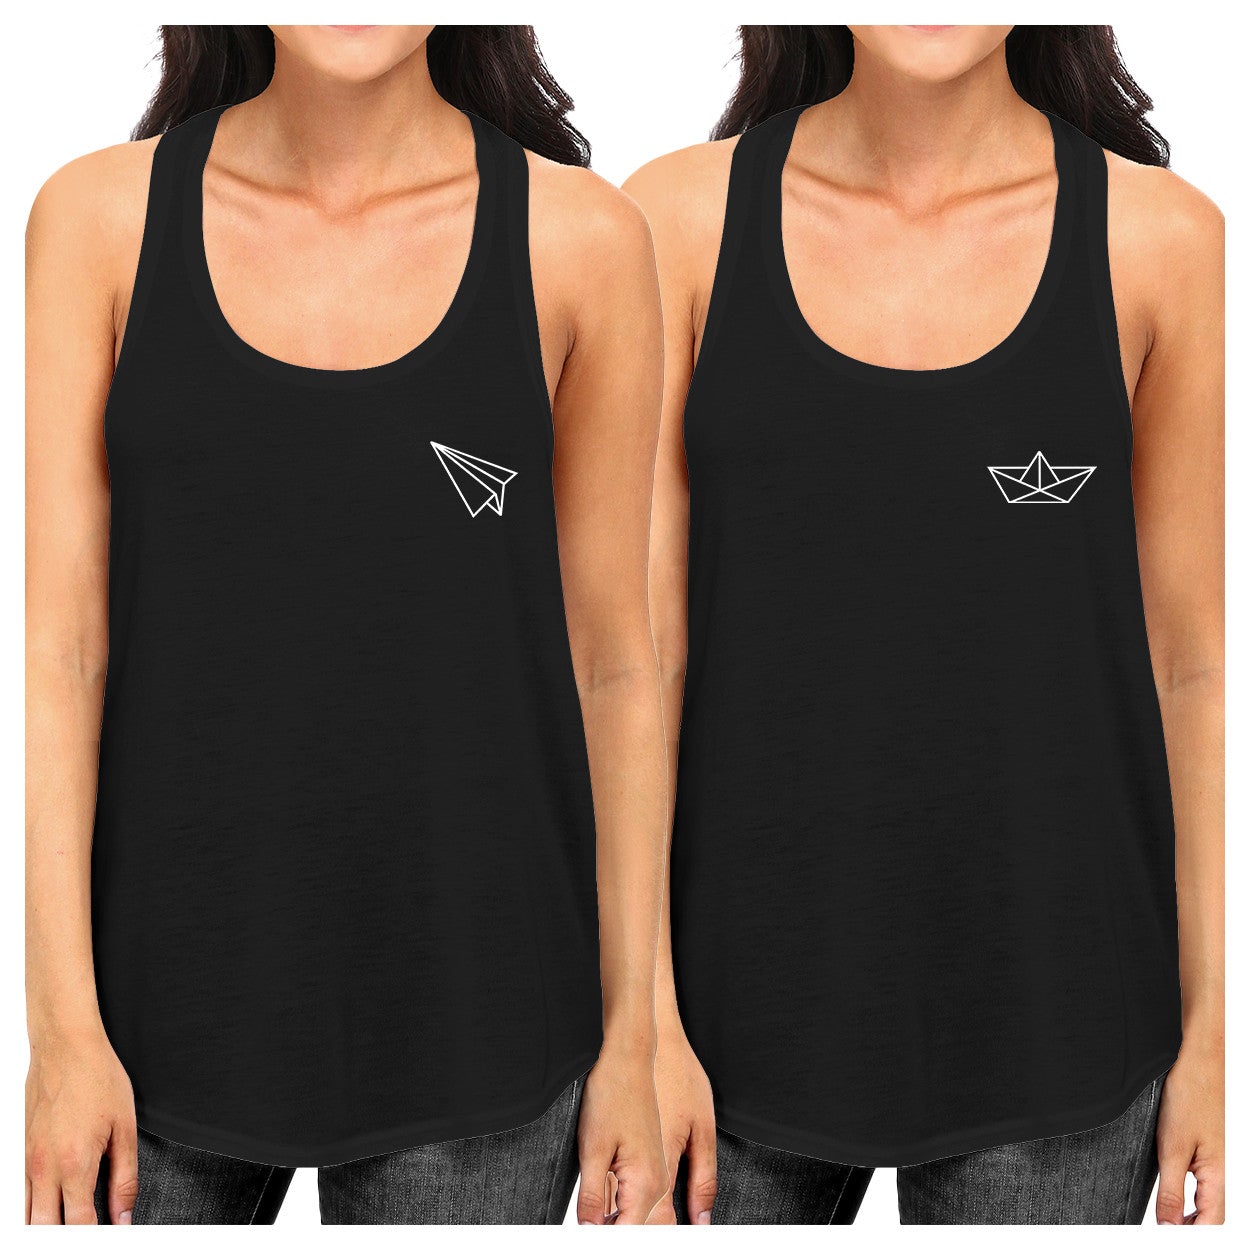 Origami Plane And Boat BFF Matching Black Tank Tops